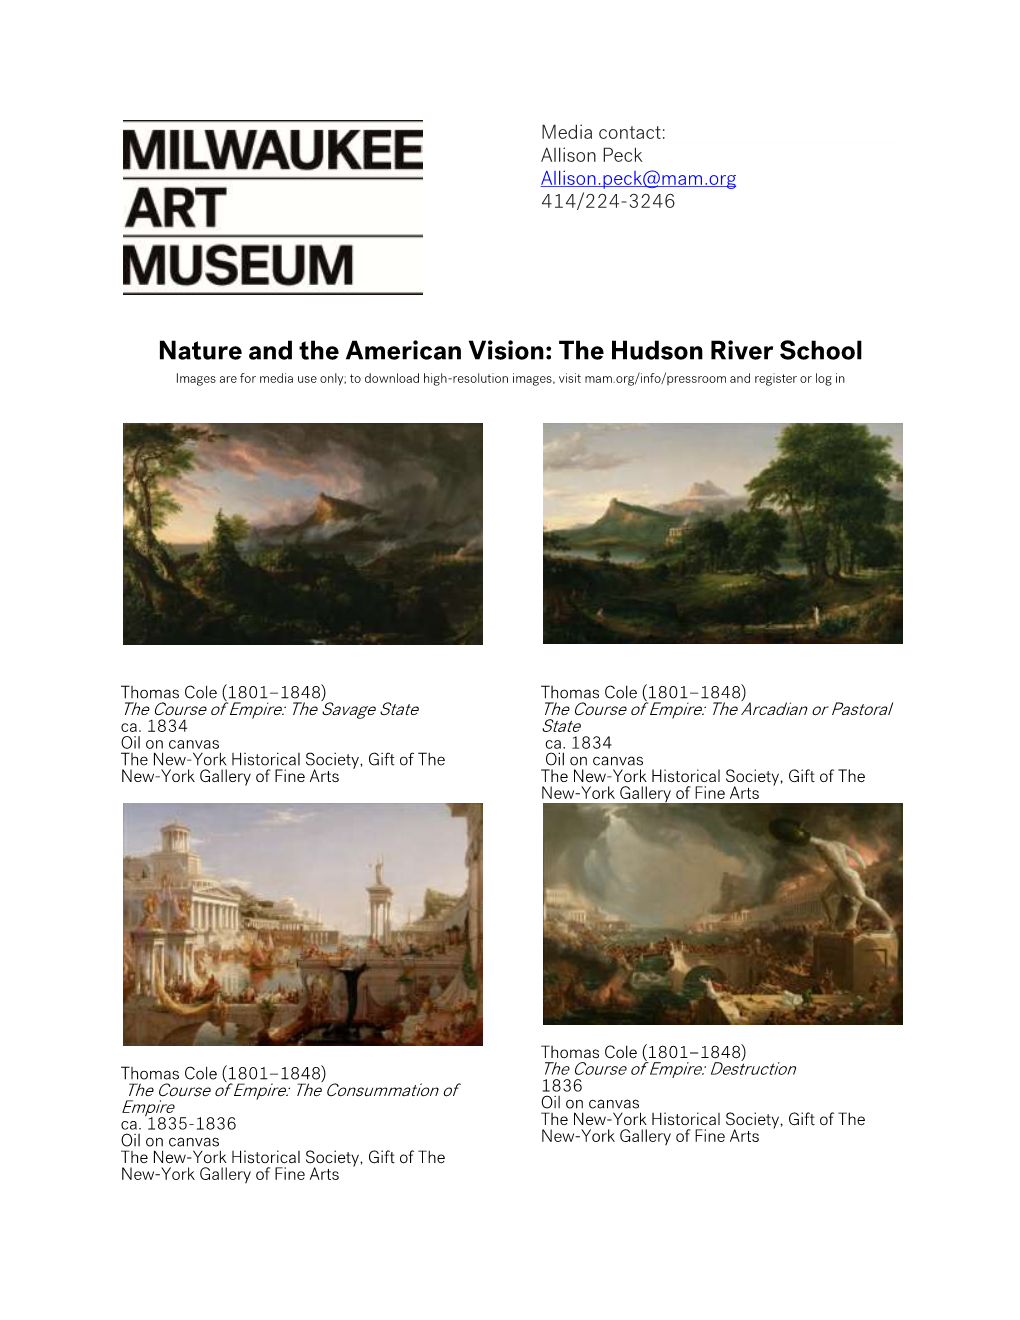 Nature and the American Vision: the Hudson River School